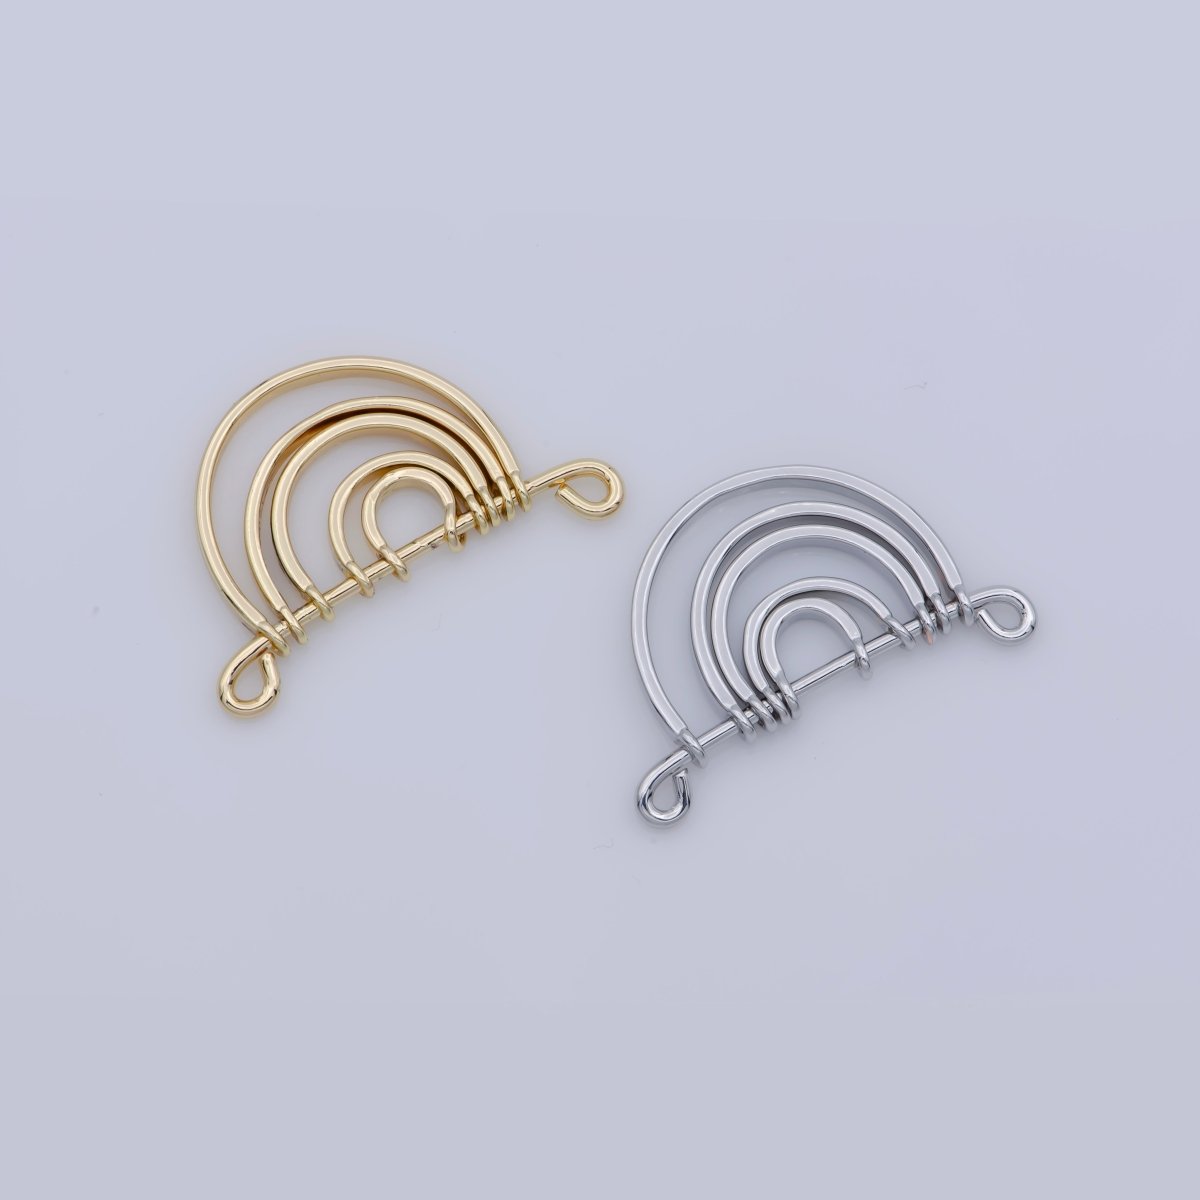 Gold Rainbow Shape Charm for Necklace Pendant Double Bail Dual Loop Charm for Jewelry Making Supply, White Gold Rainbow CONNECTOR F-319 F-575 N-065 N-066 - DLUXCA